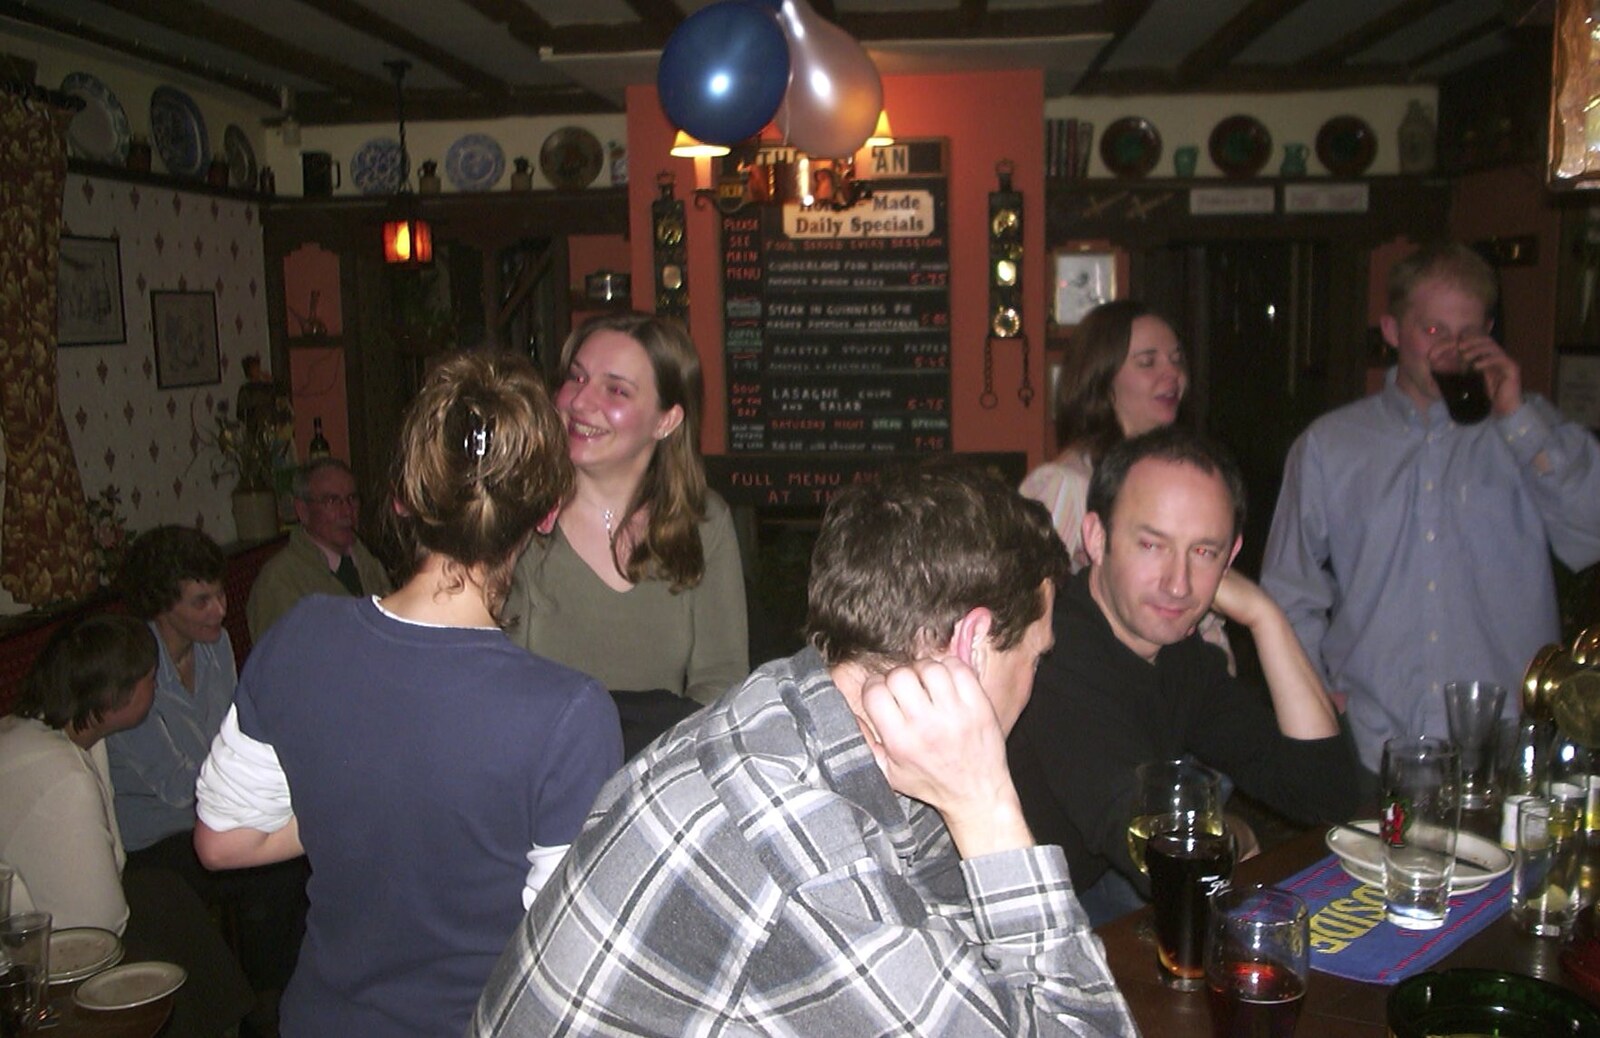 Paul and Claire's Engagement Party, Brome Swan, Suffolk - 27th March 2004: Bar scene